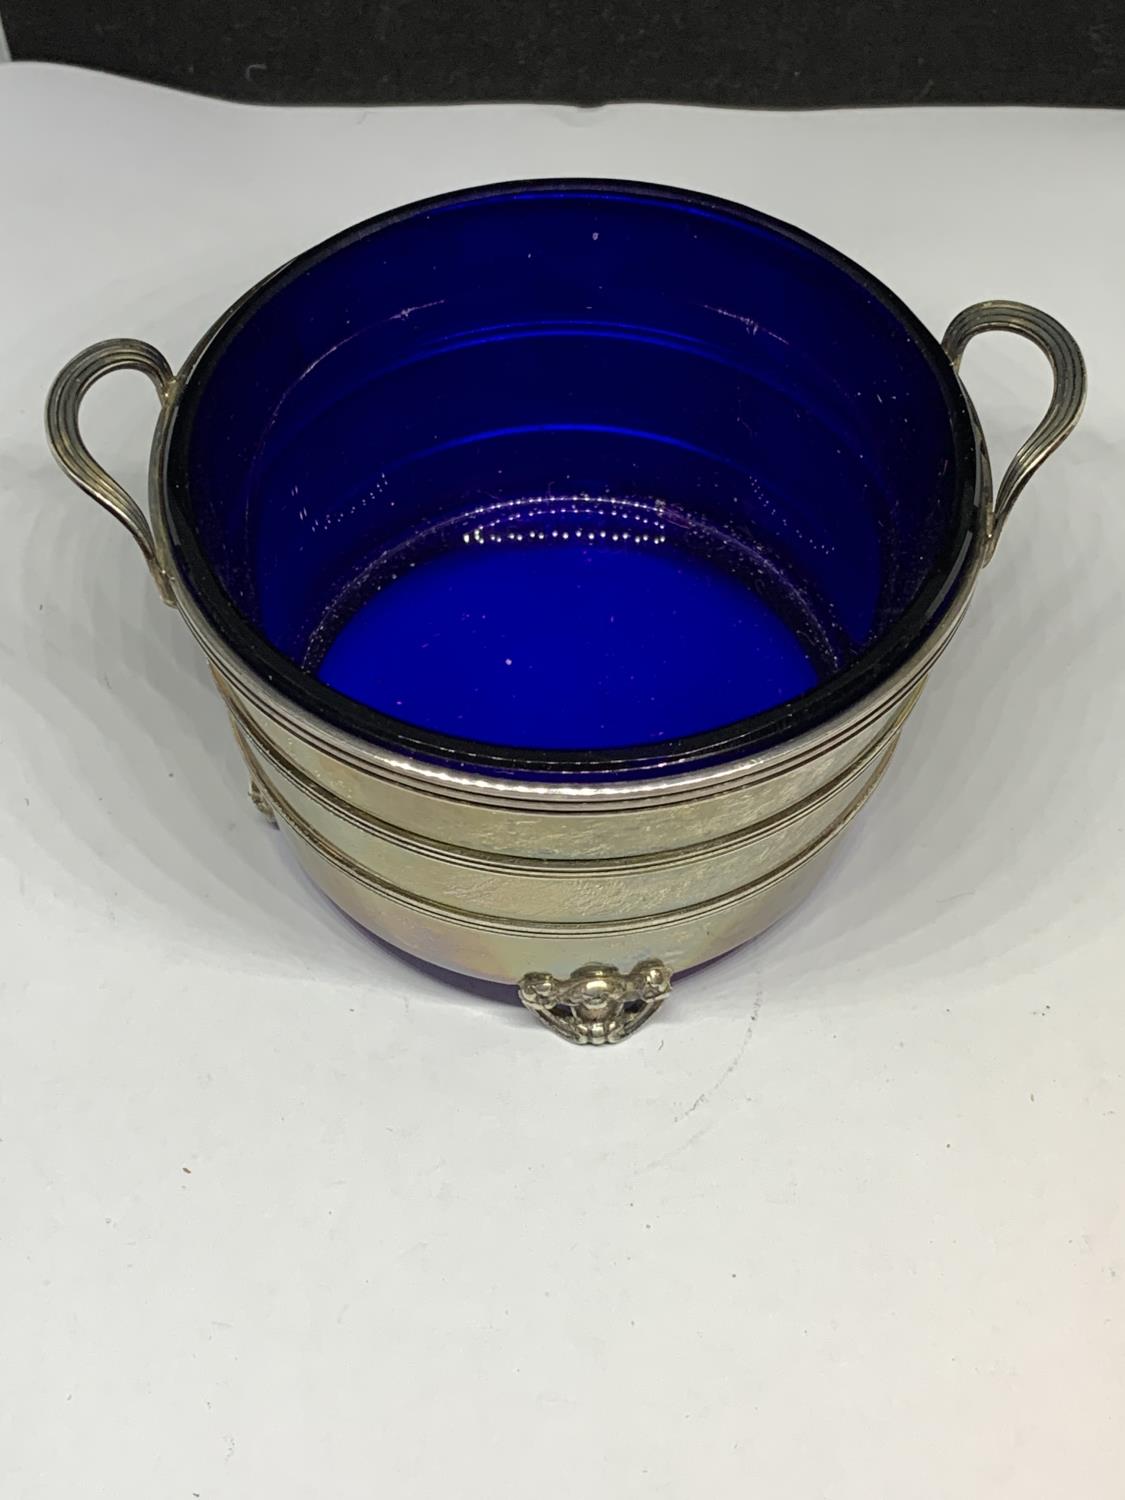 A HALLMARKED BIRMINGHAM SILVER TWIN HANDLED DEEP DISH ON FOUR DECORATIVE FEET WITH BLUE GLASS - Image 3 of 6